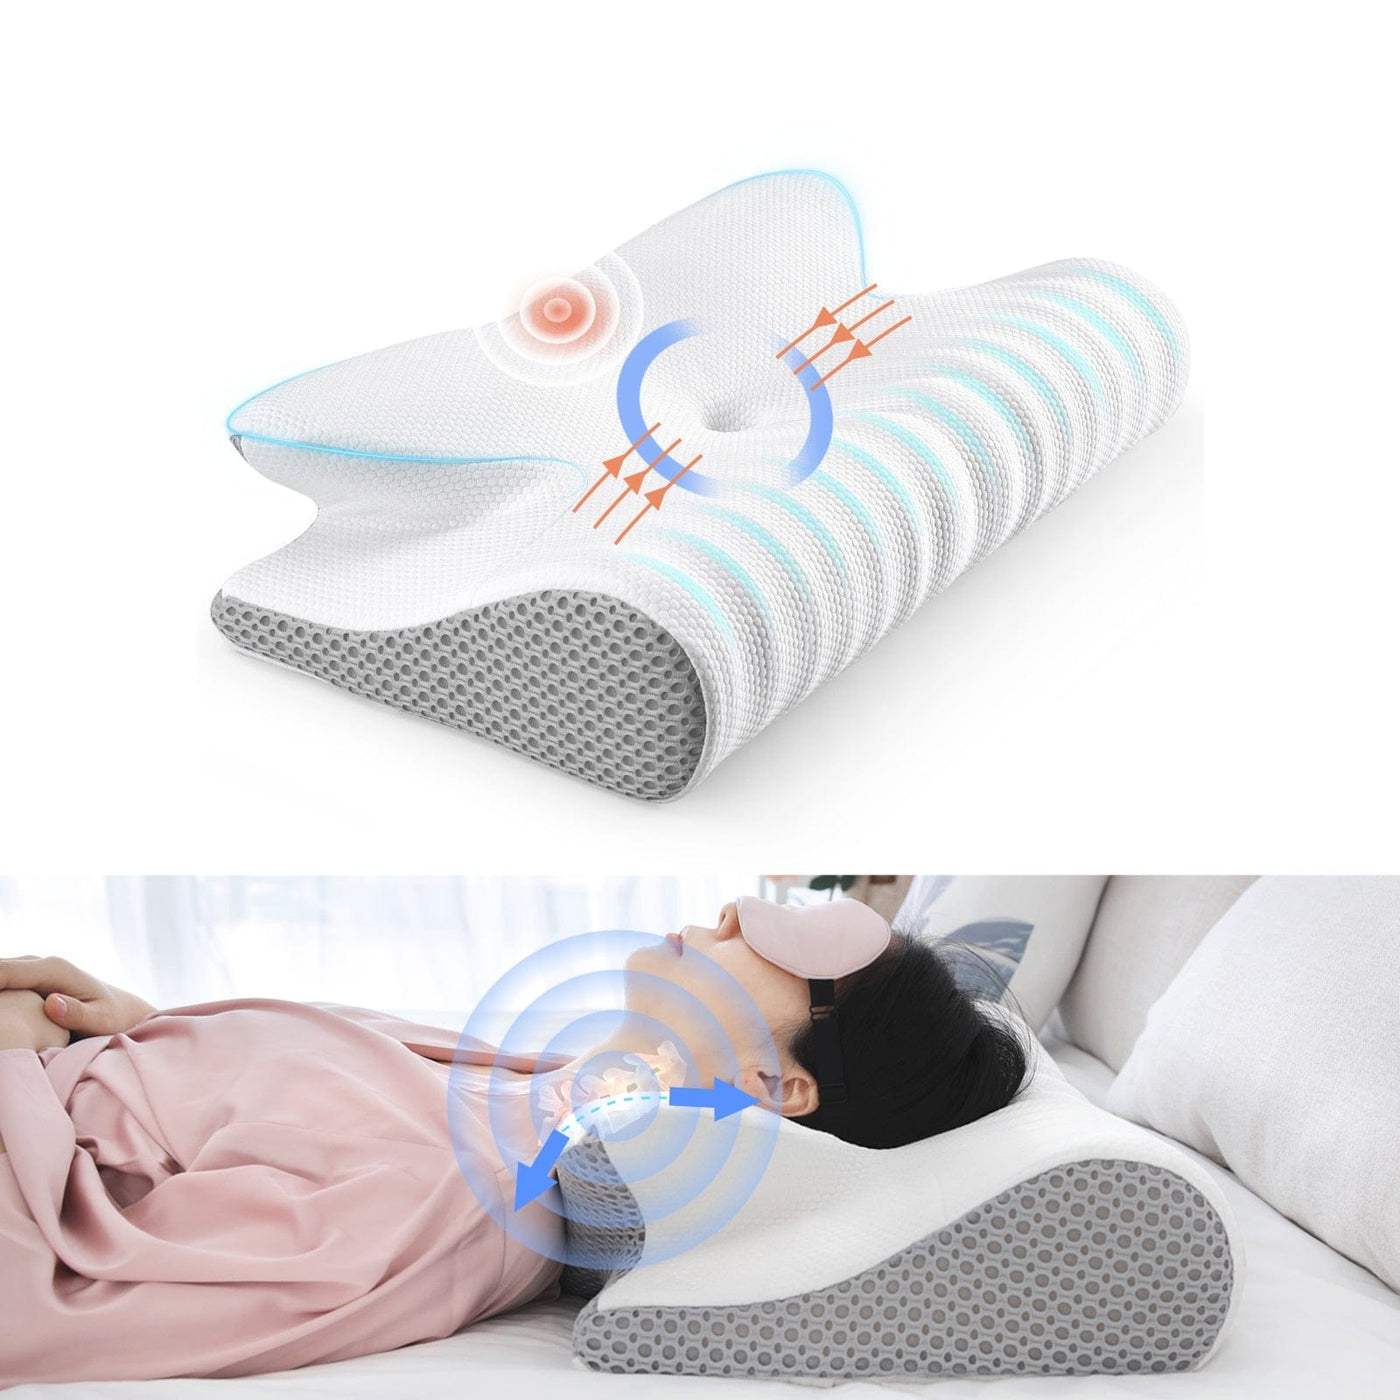 {{ Abdominal ABS Stimulator Fitness Body Slimming Massager }} - {{ shop {{ HOT SEASON PLACE™ }} {{ Rechargeable 5}} {{ HOT SEASON PLACE™ }} {{ FITNESS}} _n {{ Abdominal ABS Stimulator Fitn HOT SEASON PLACE™ 0 Foam Cervical Pillow Ergonomic Orthopedic }} ame }}